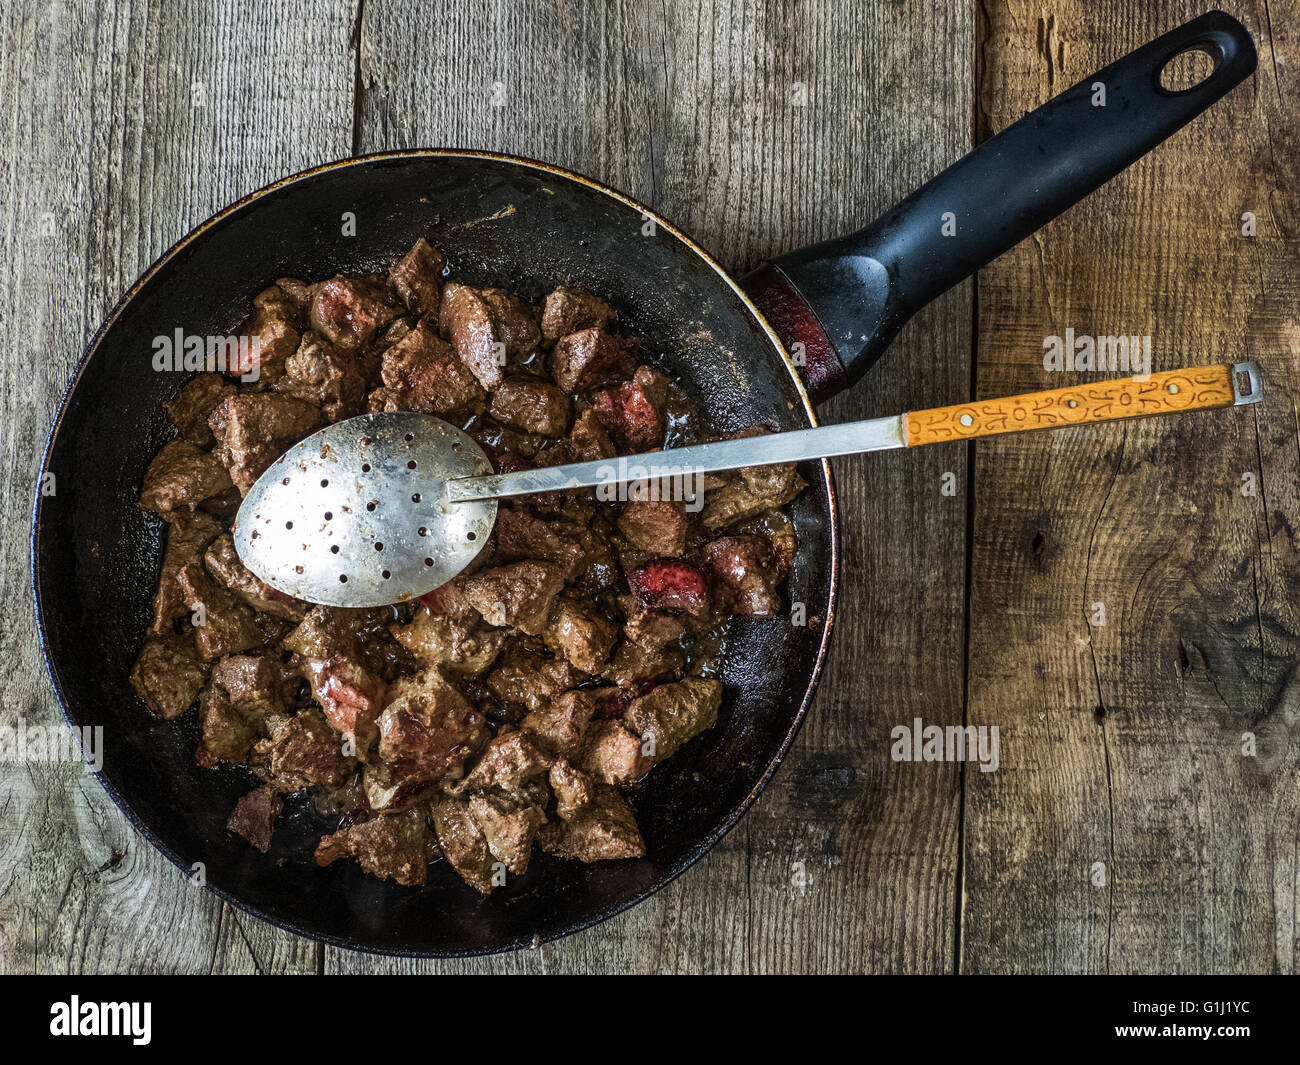 Fried liver in a frying pan Stock Photo